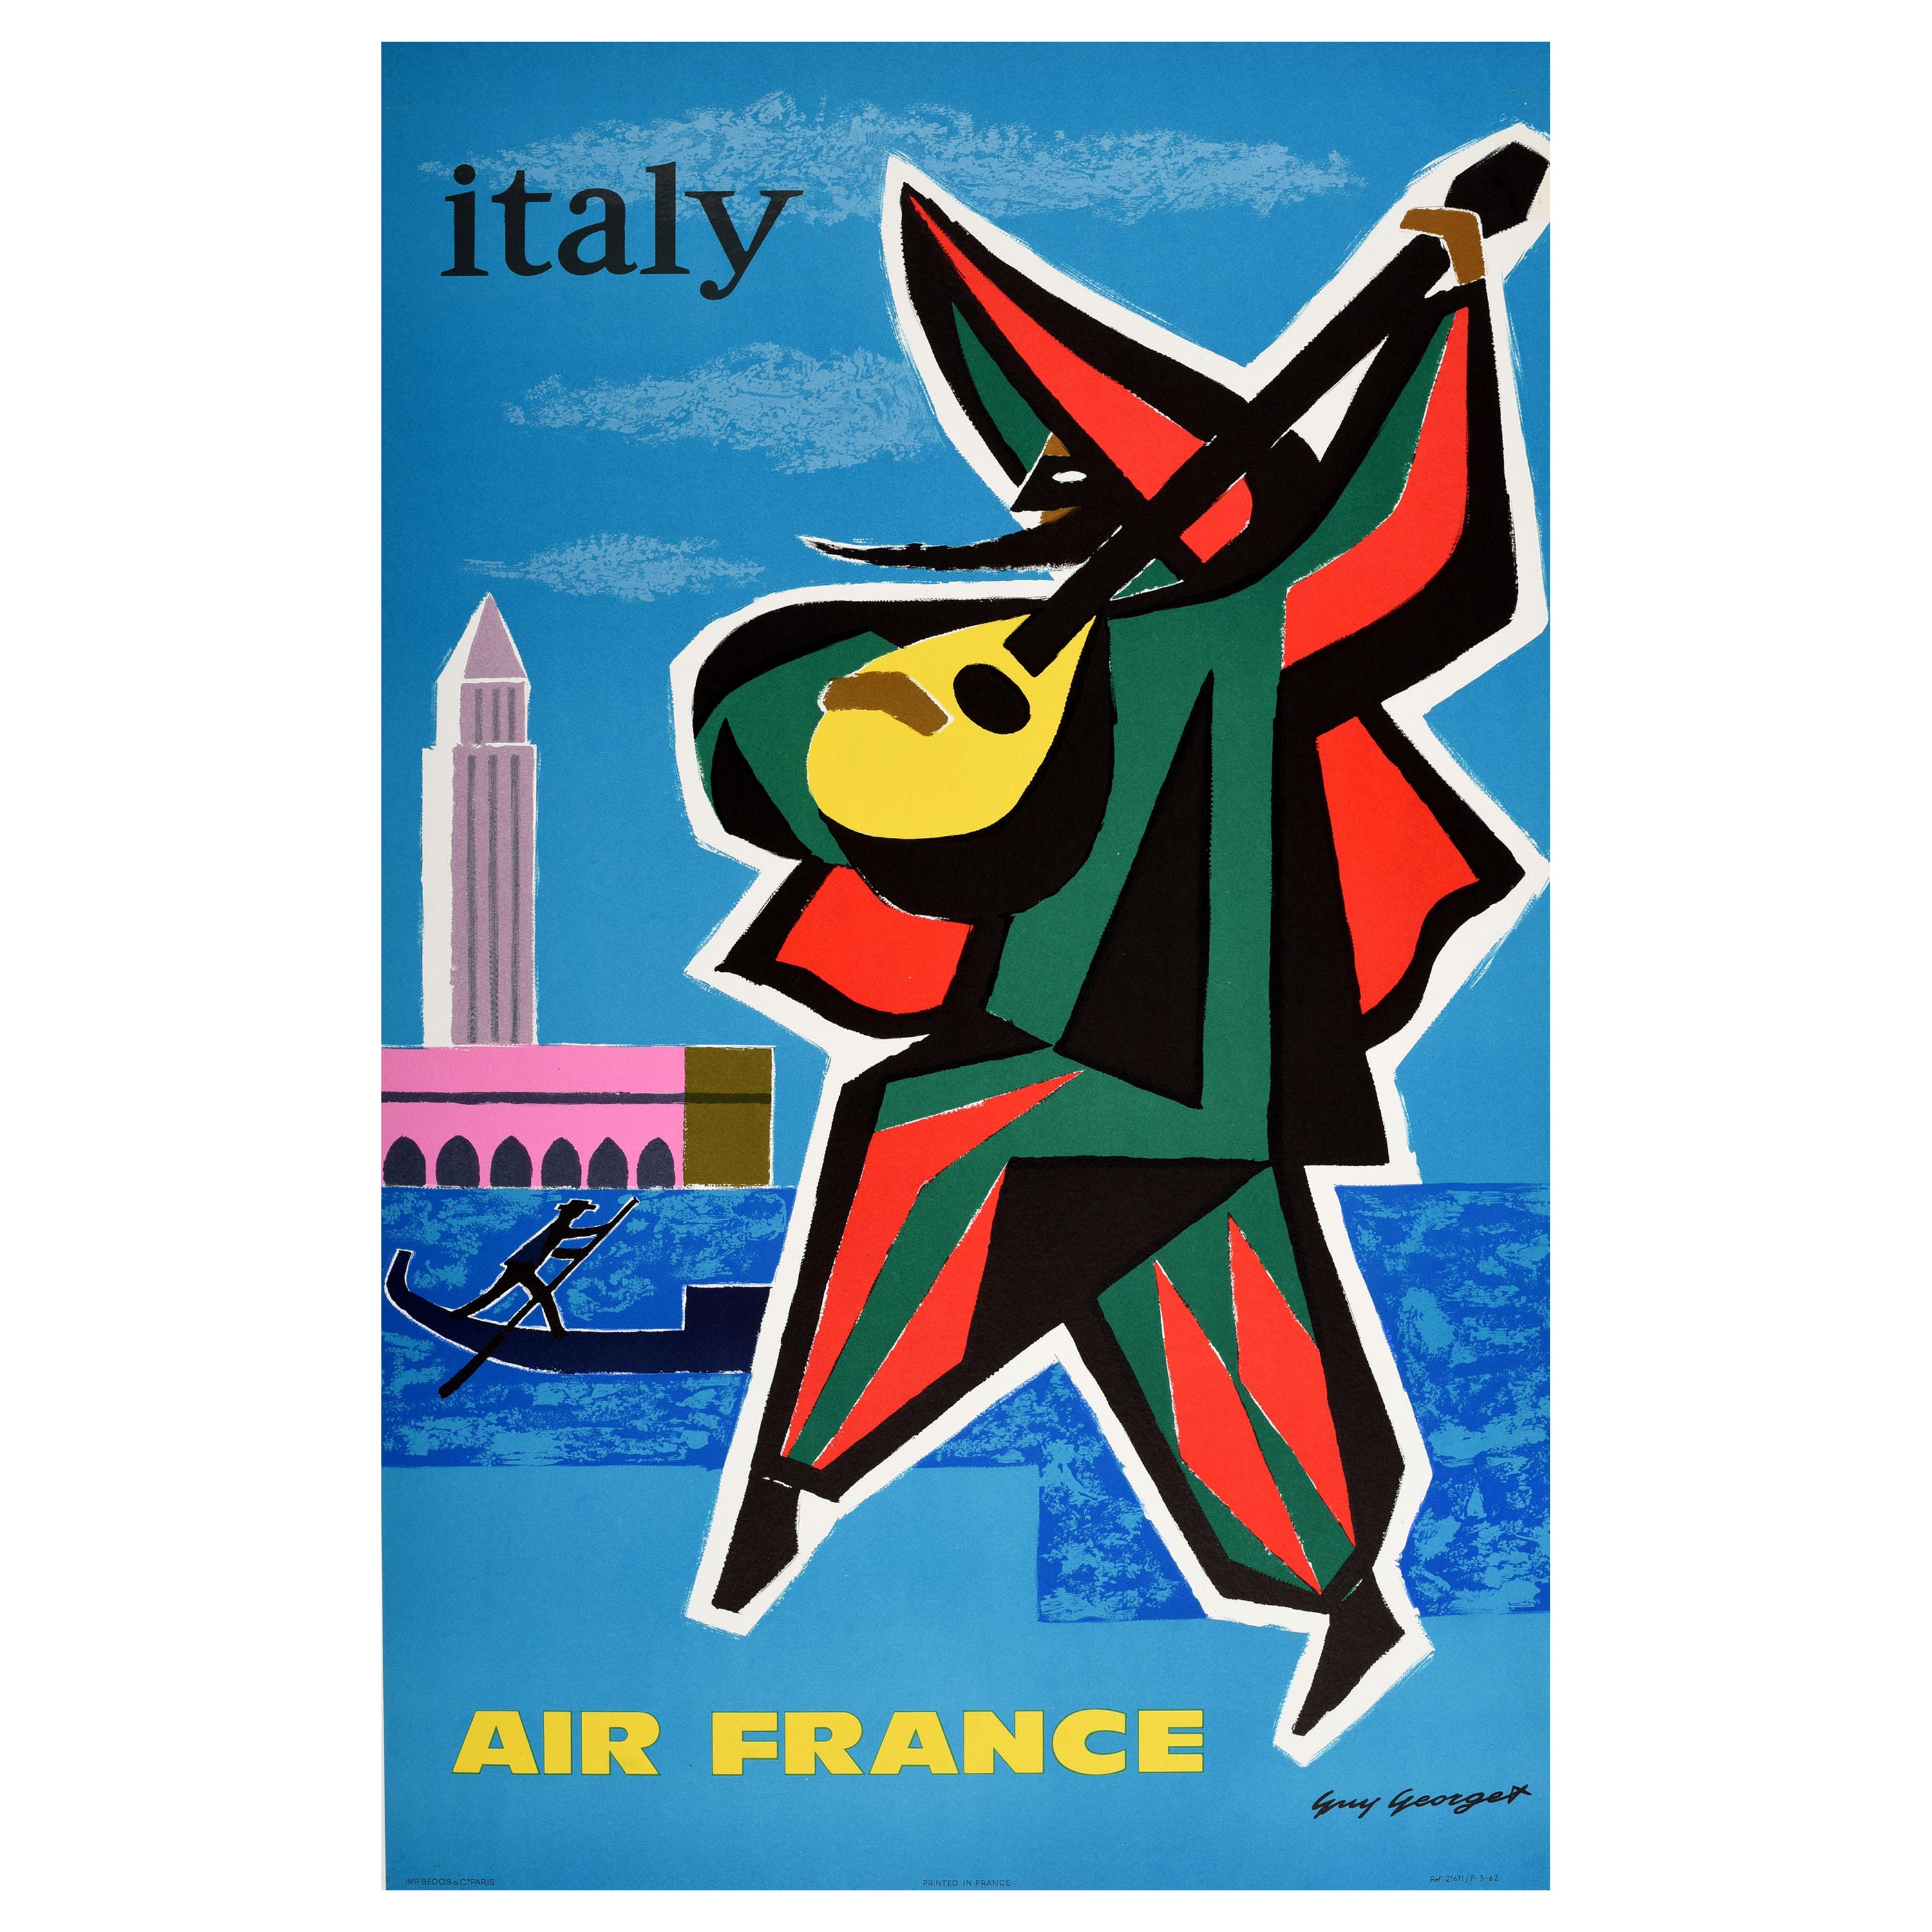 Original Vintage Travel Advertising Poster Italy Venice Air France Guy Georget